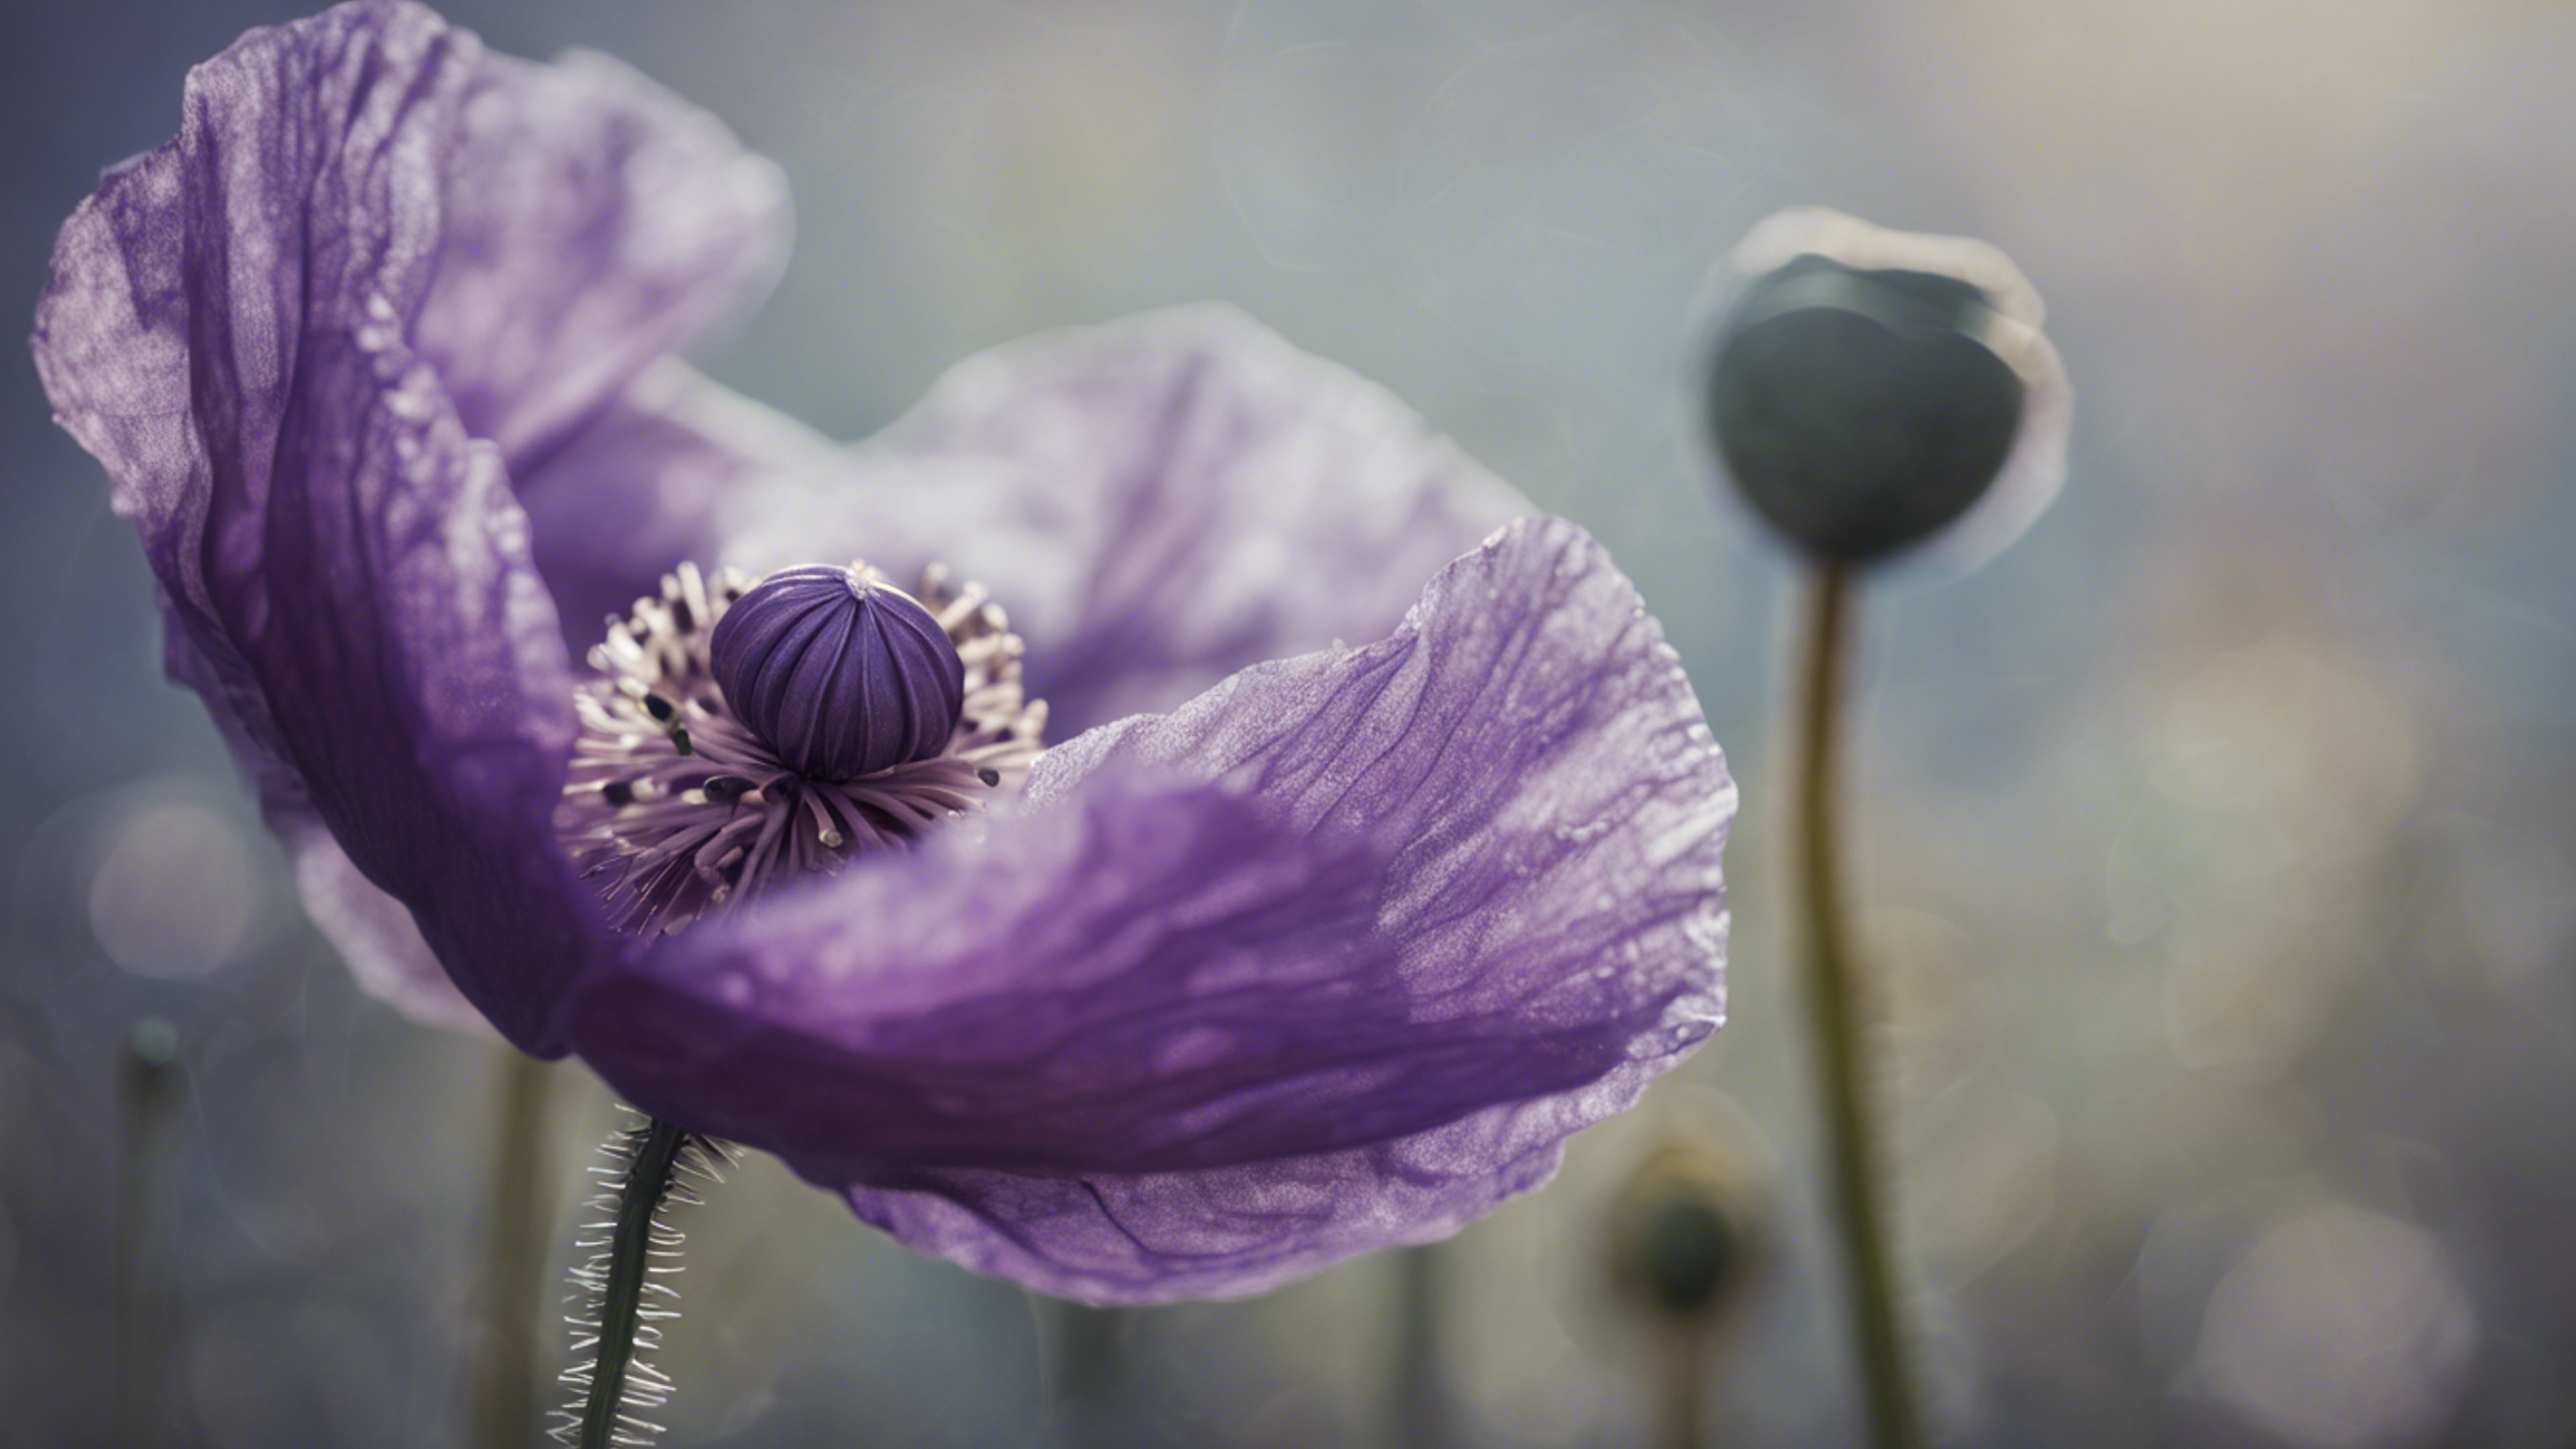 A close-up of a purple poppy with intricate details on a textured canvas. Ფონი[f5d07fa5408f4773ae7b]